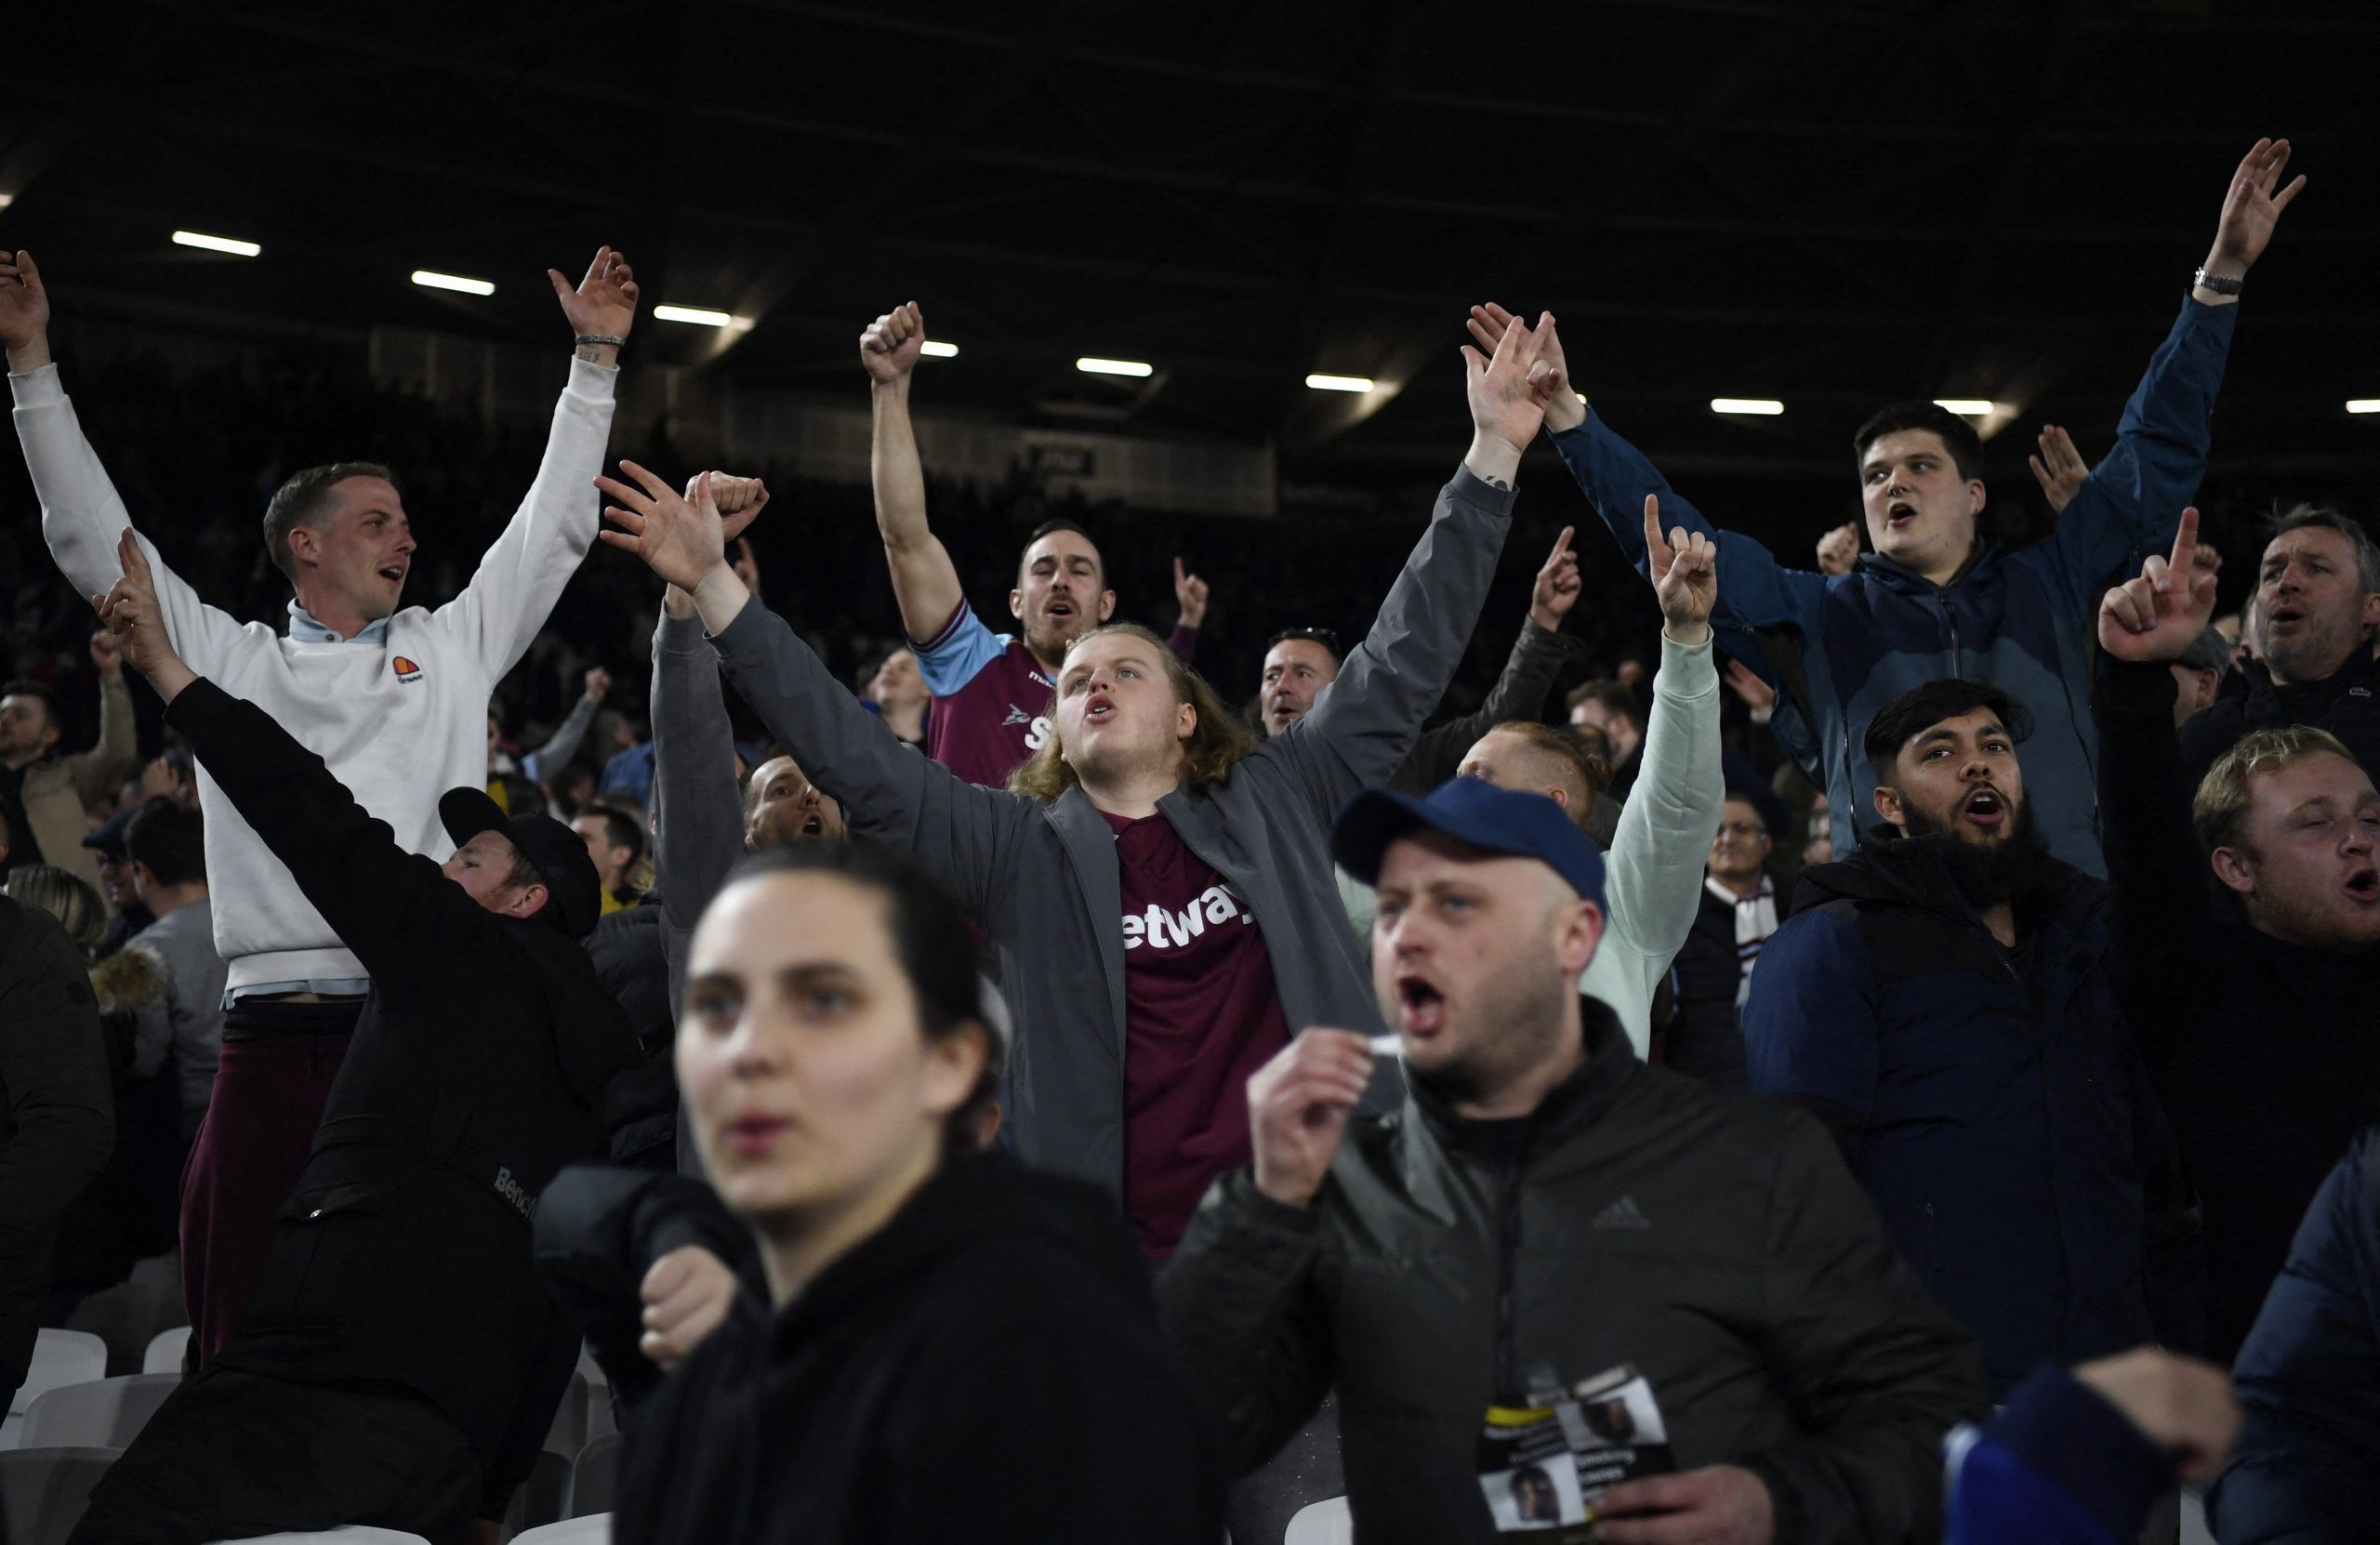 Soccer Football - Europa League - Round of 16 Second Leg - West Ham United v Sevilla - London Stadium, London, Britain - March 17, 2022  West Ham United fans celebrate in the stands after the match REUTERS/Tony Obrien